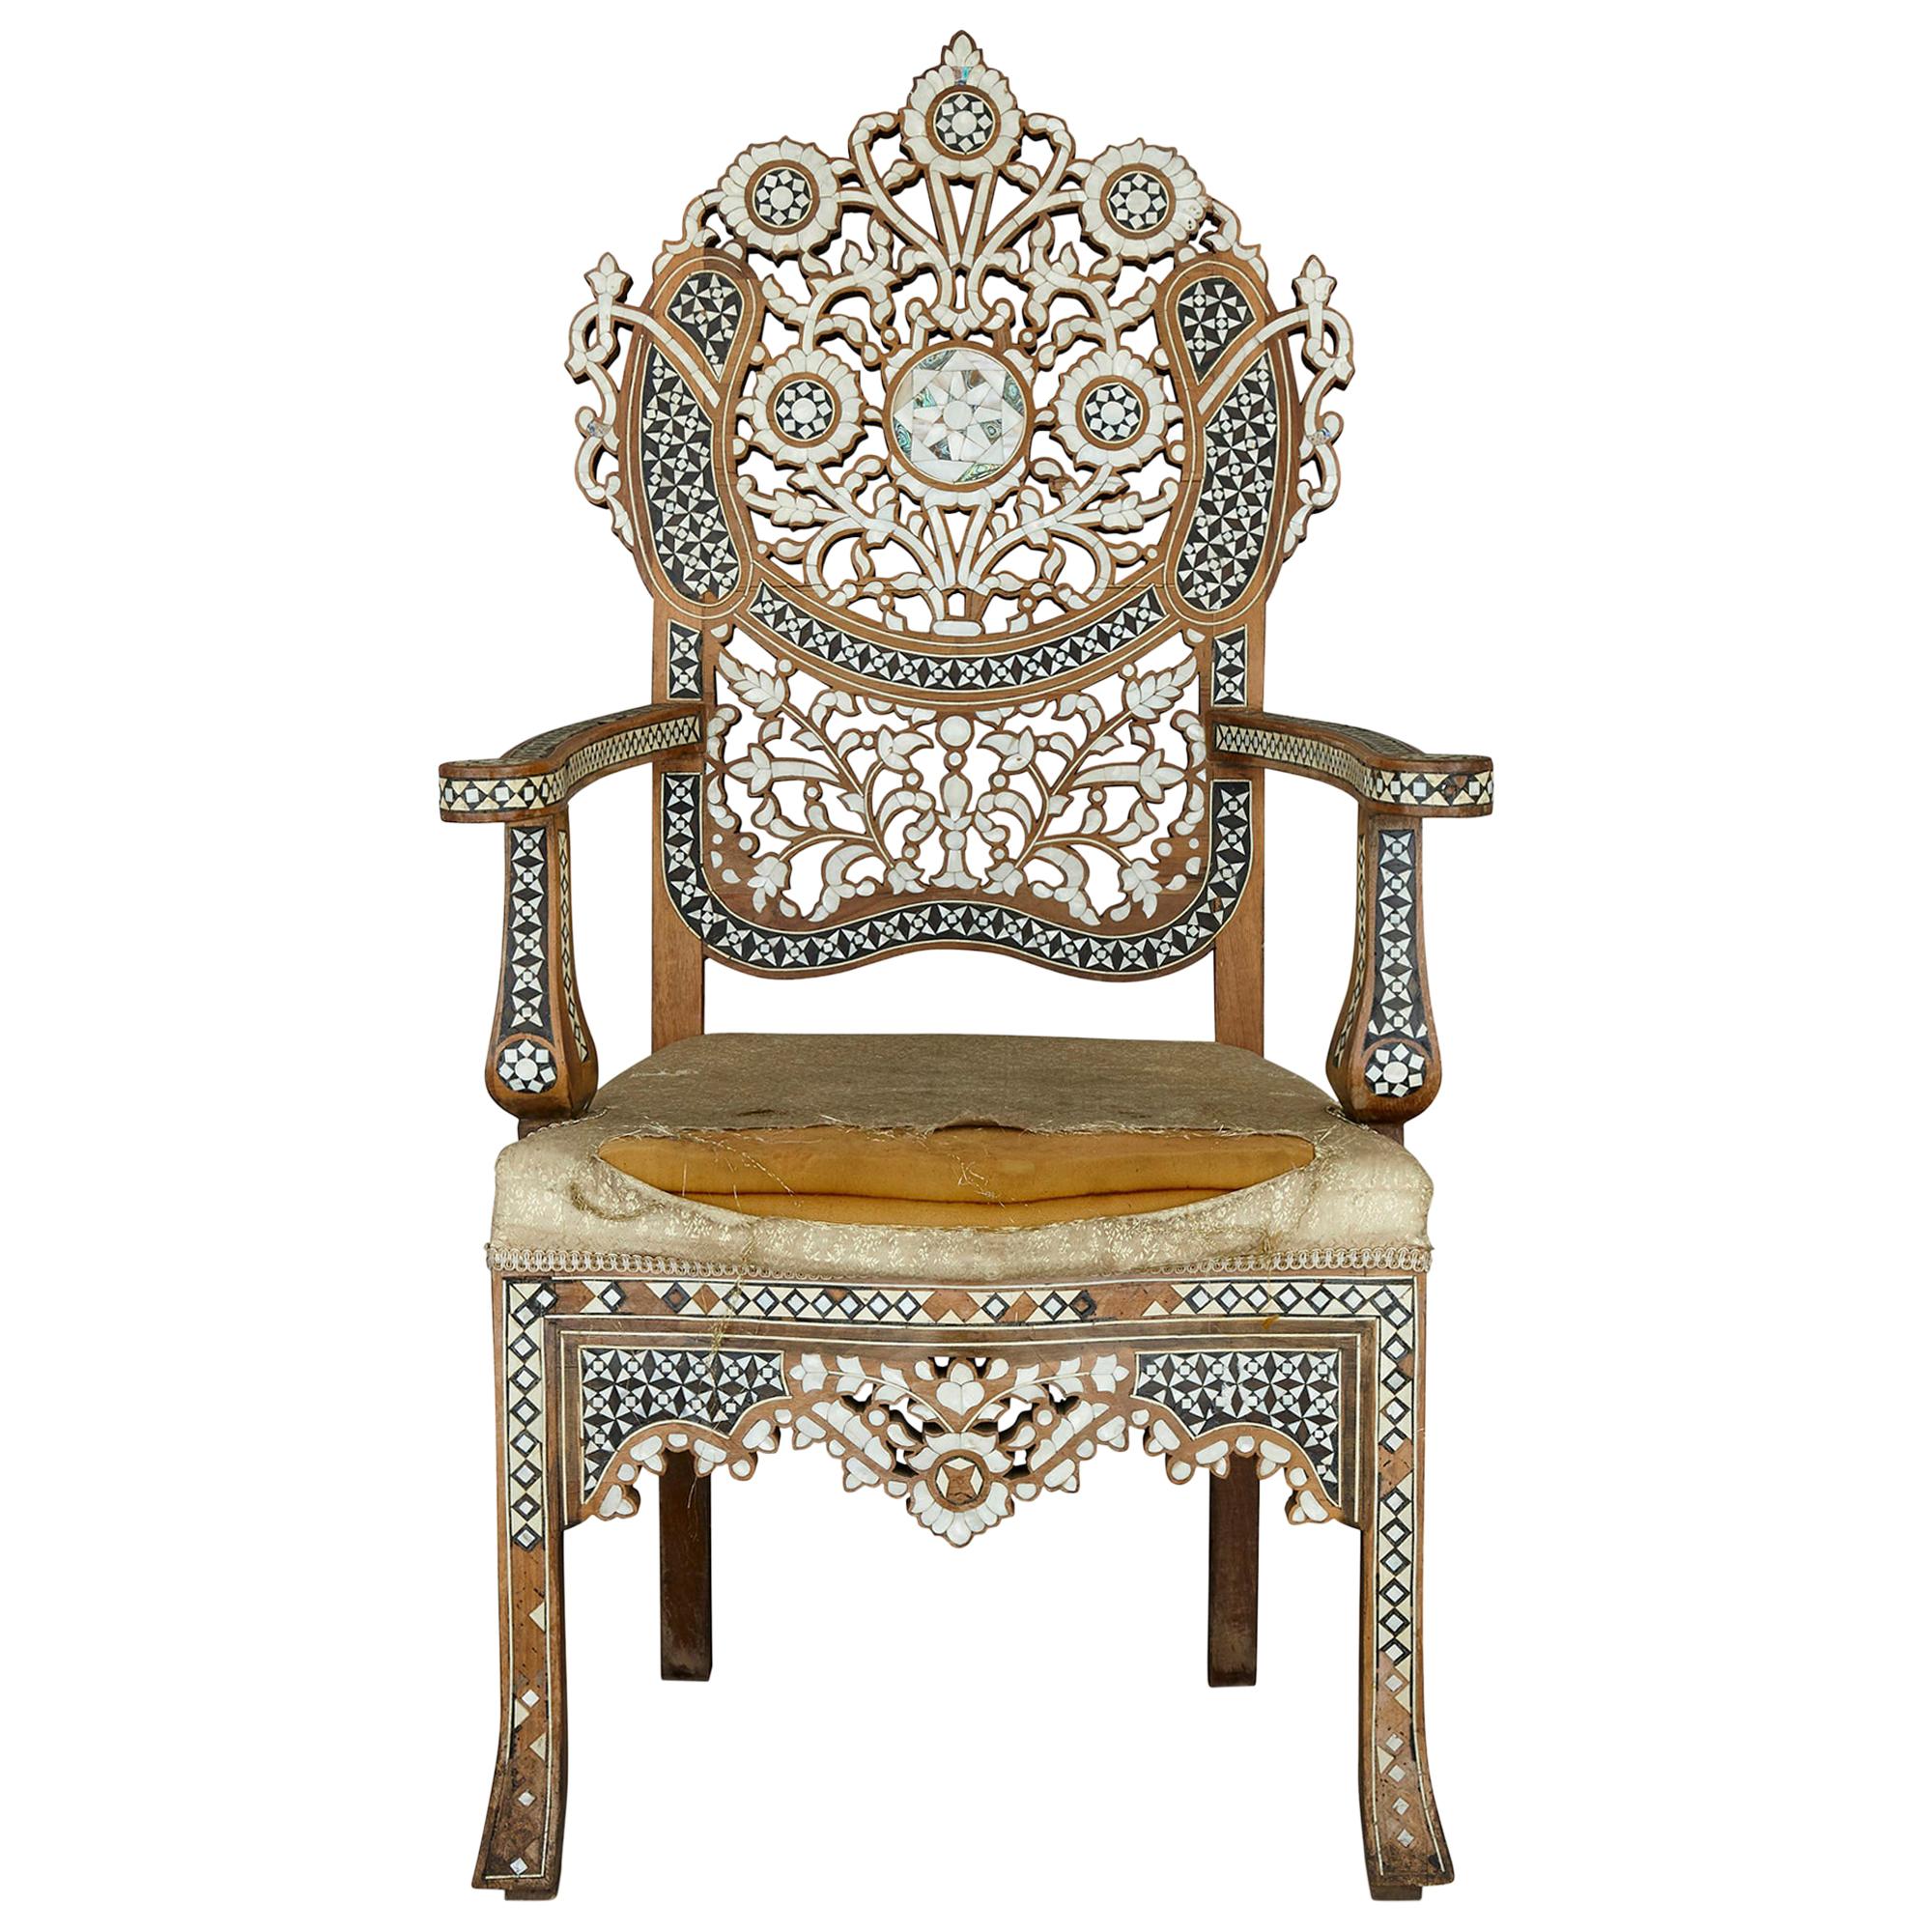 Late 19th Century Syrian Chair with Arabesque Mother-of-Pearl and Abalone Inlays